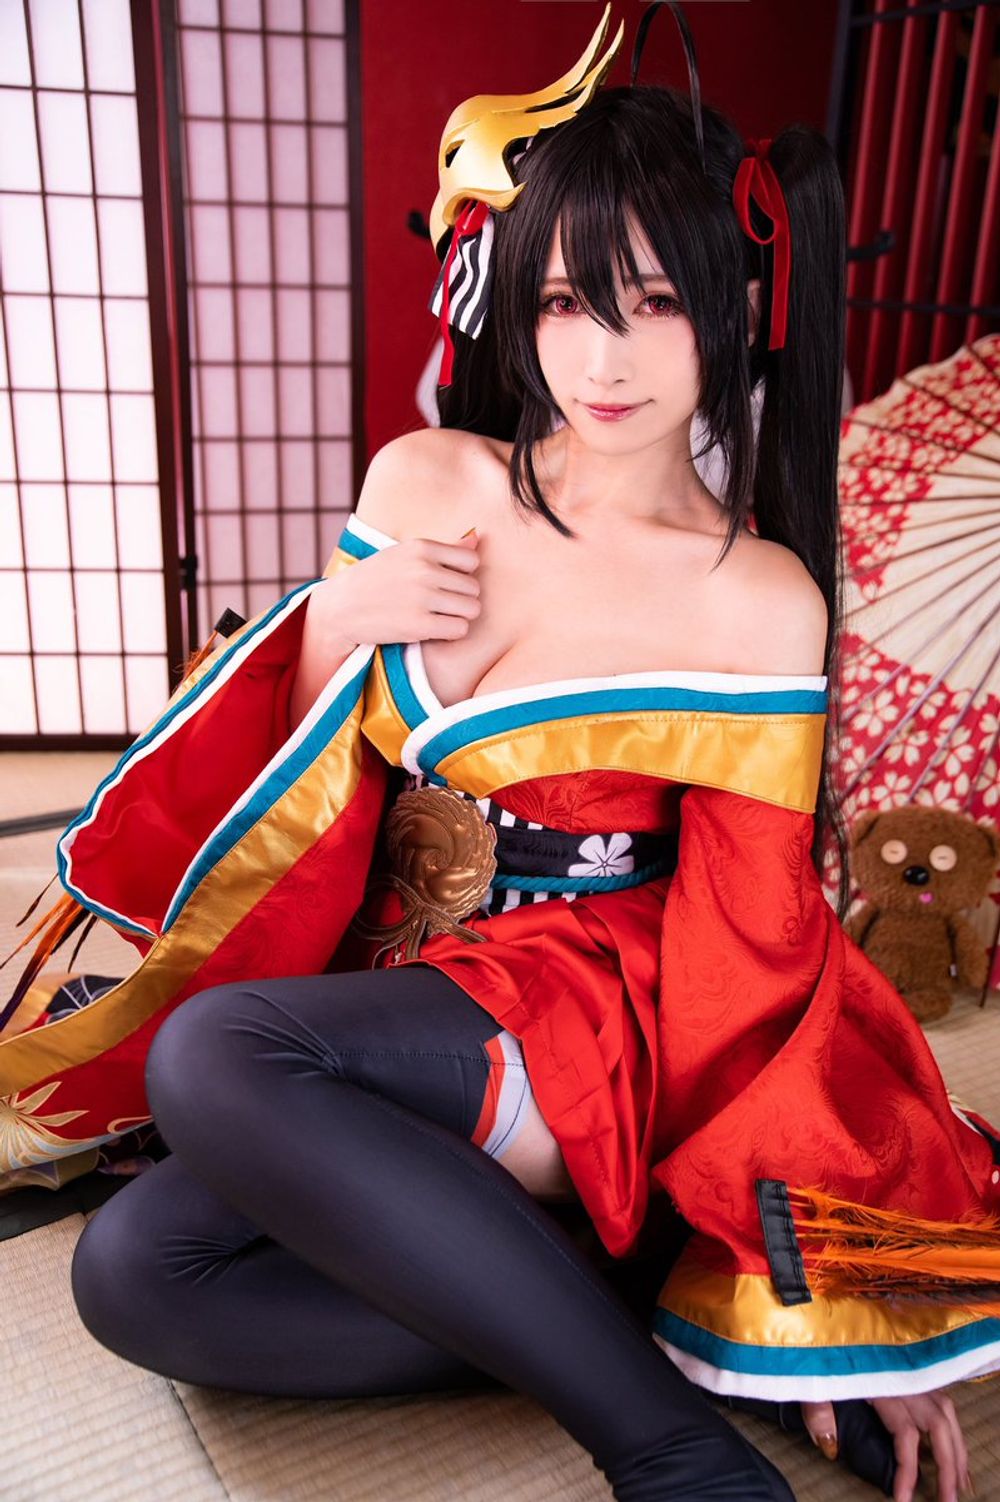 Super sweet coser &quot;JILL&quot; removes heavy makeup and is a cute girl